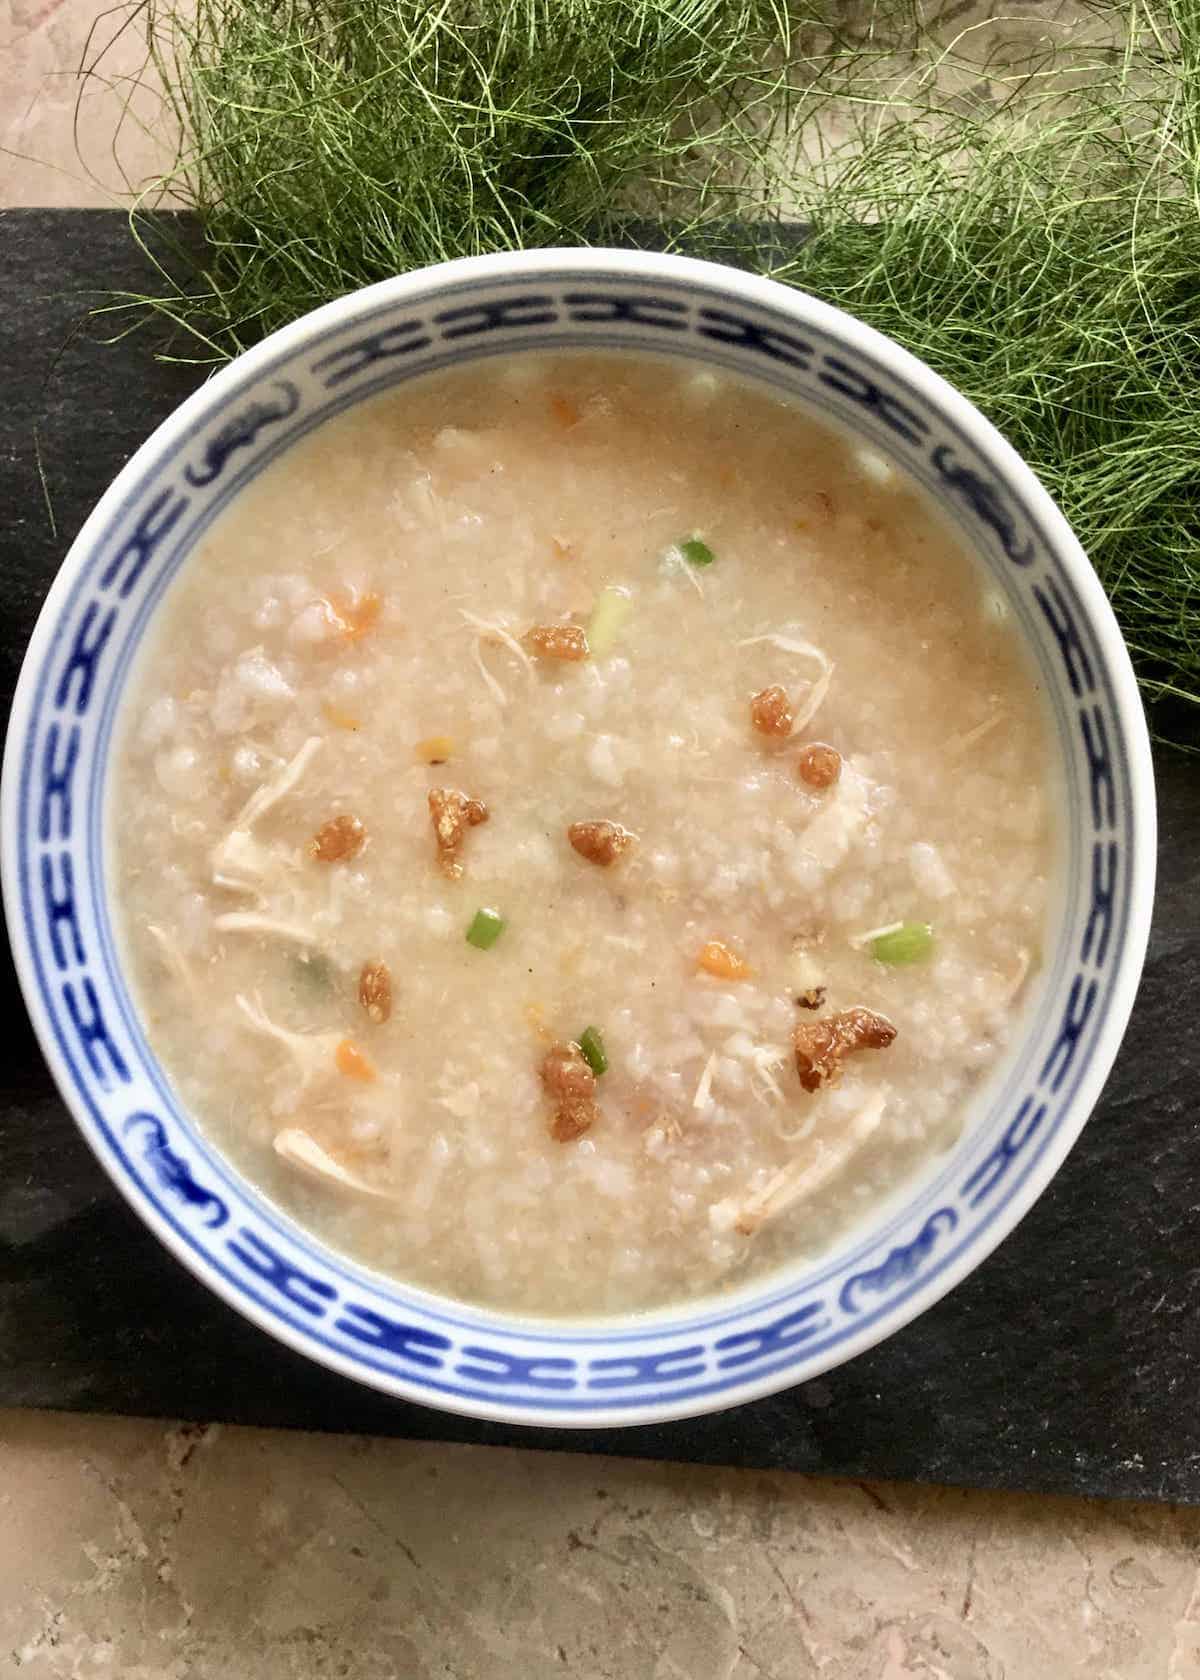 A close-up of a bowl of chicken congee